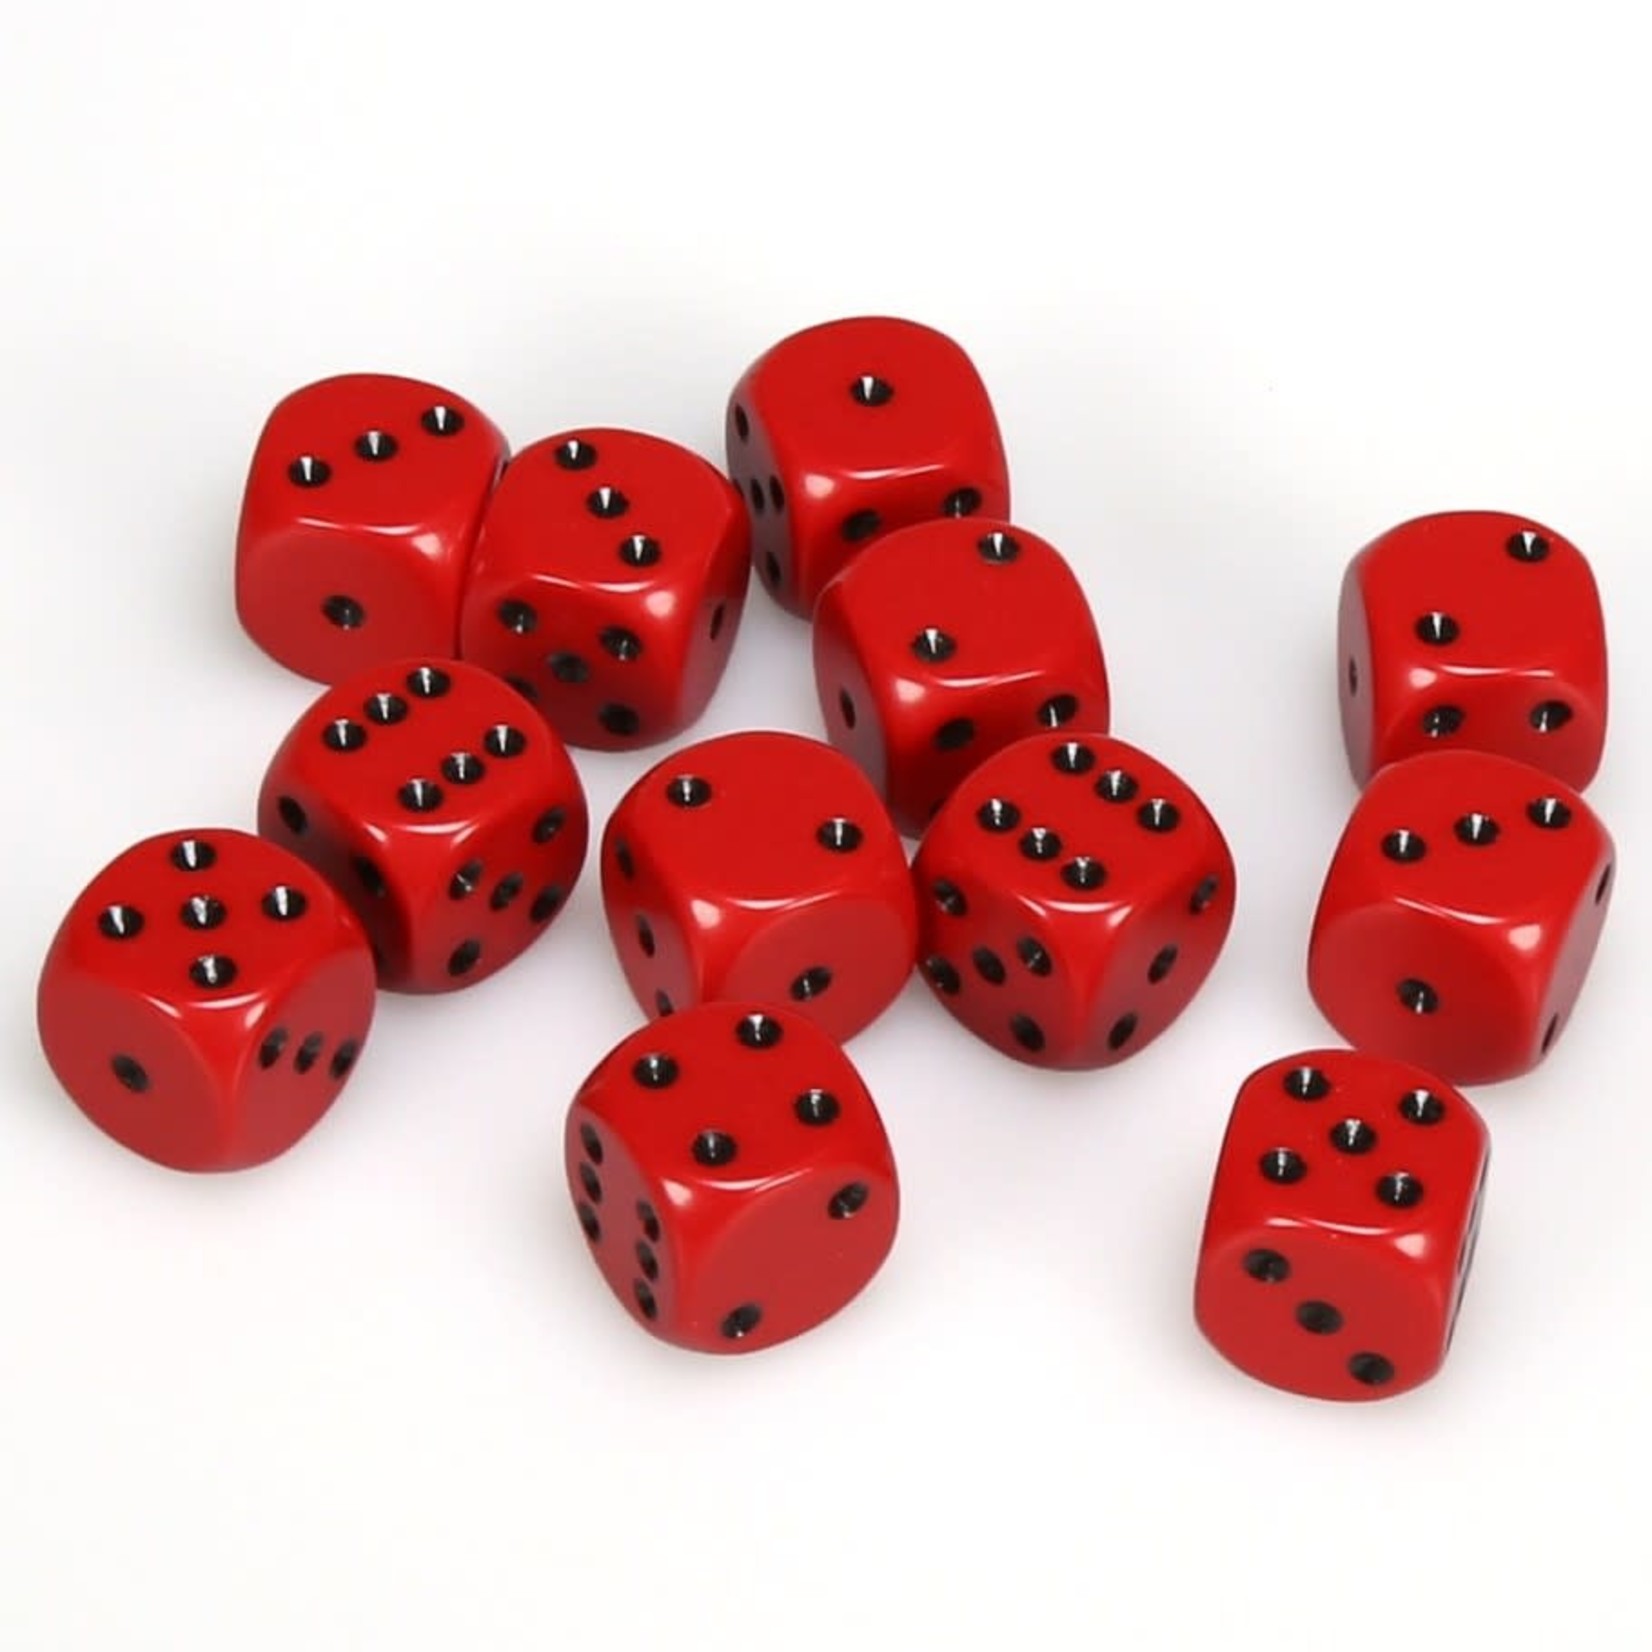 Chessex Chessex Opaque Red with Black 16 mm d6 12 die set